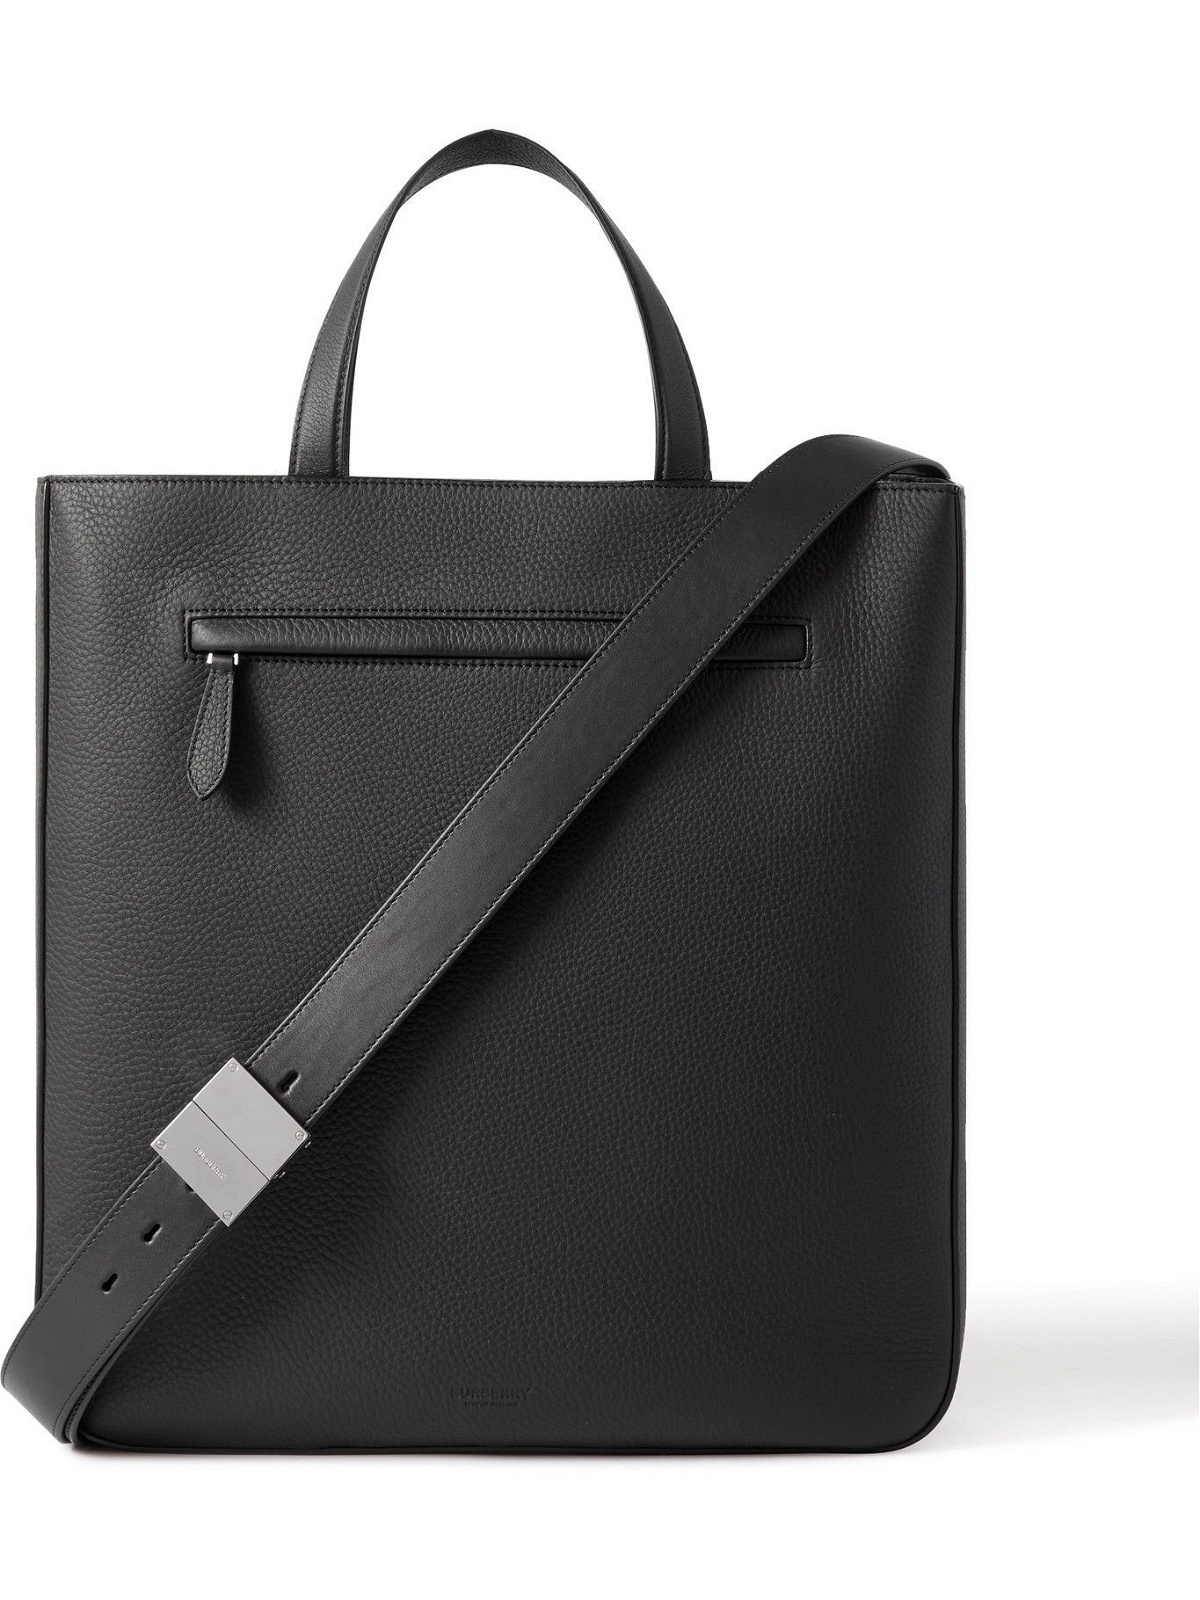 Burberry - Full-Grain Leather Tote Bag Burberry